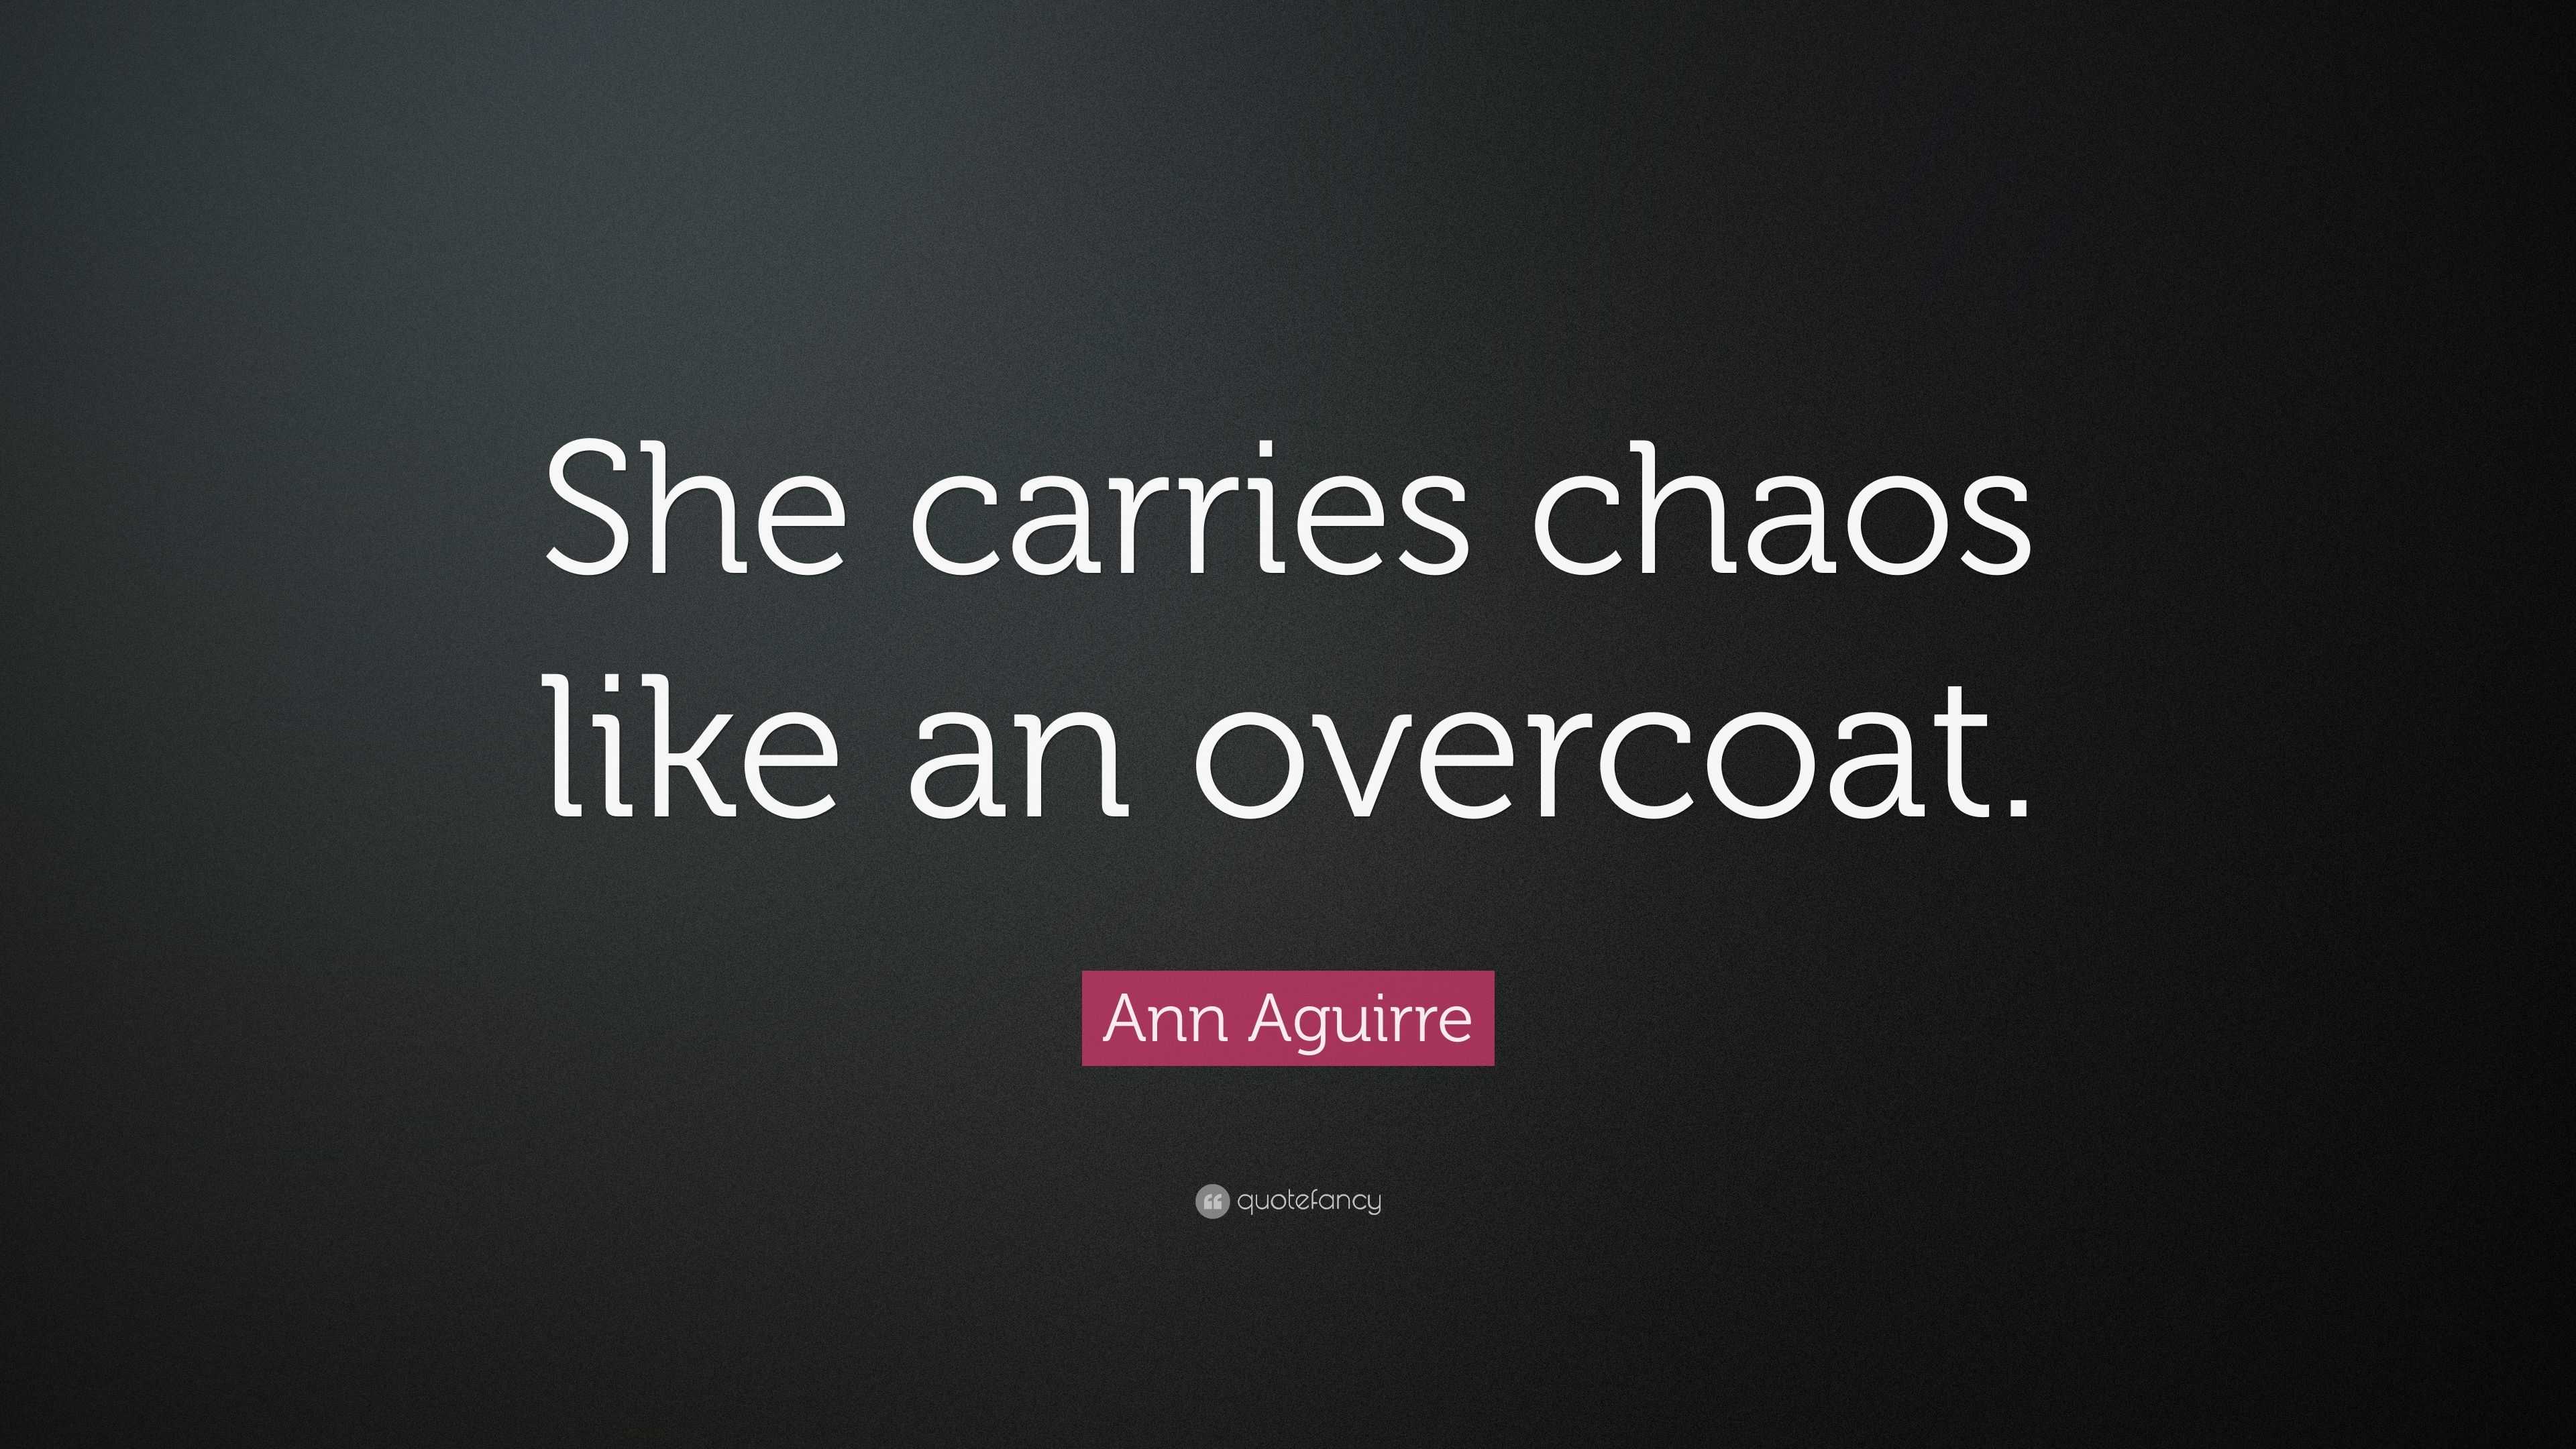 Ann Aguirre Quote: “She carries chaos like an overcoat.”